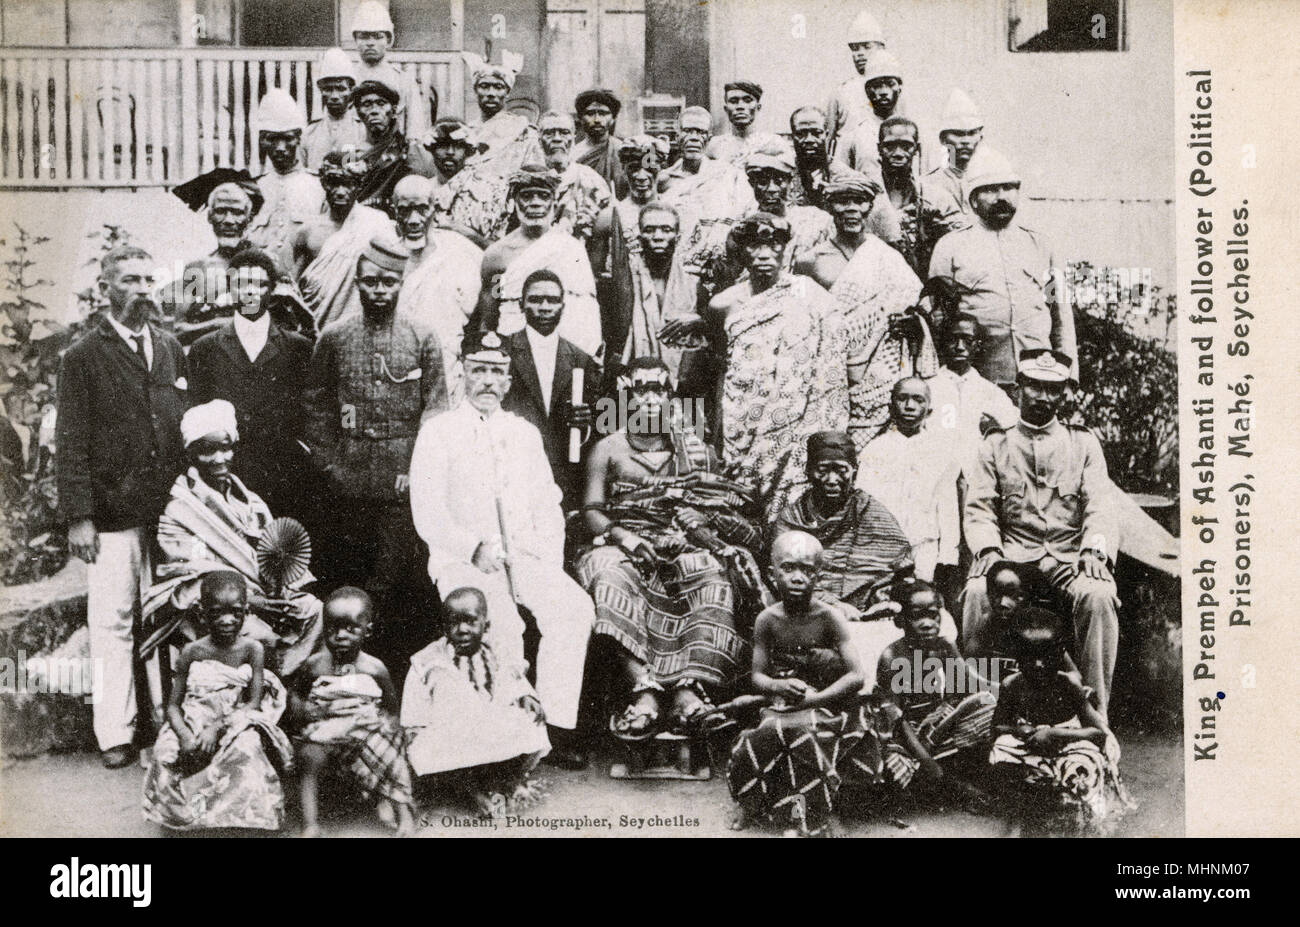 Mahe, Seychelles - King Prempeh of Ashanti and Followers (Political Prisoners). Prempeh I (Otumfuo Nana Prempeh I, 18701931) was the 13th King ruler of the Asante state of the Kingdom of Ashanti and the Asante Oyoko Abohyen Dynasty. King Asantehene Prempeh I ruled from 1888 until his death in 1931, and fought an Ashanti war against Britain in 1893. In December 1895, the British left Cape Coast with an expeditionary force. It arrived in Kumasi in January 1896 under the command of Robert Baden-Powell. The Asantehene directed the Ashanti to not resist, as he feared a genocide. Britain annexed the Stock Photo